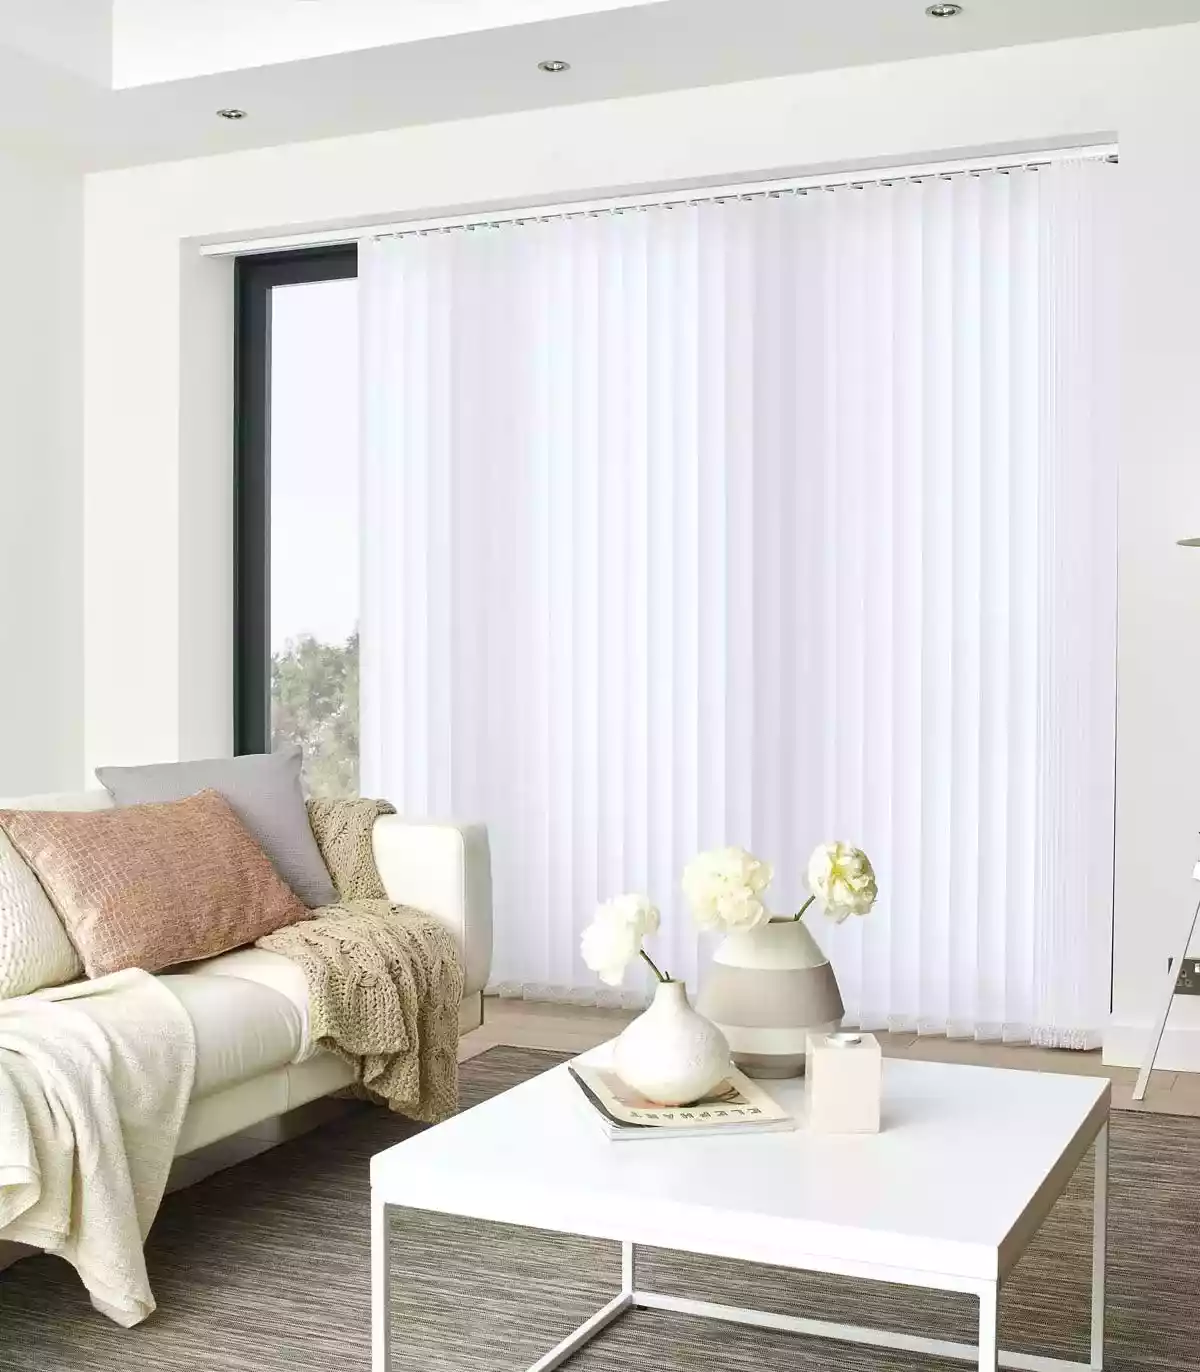 Chelsea Ice Vertical Blinds